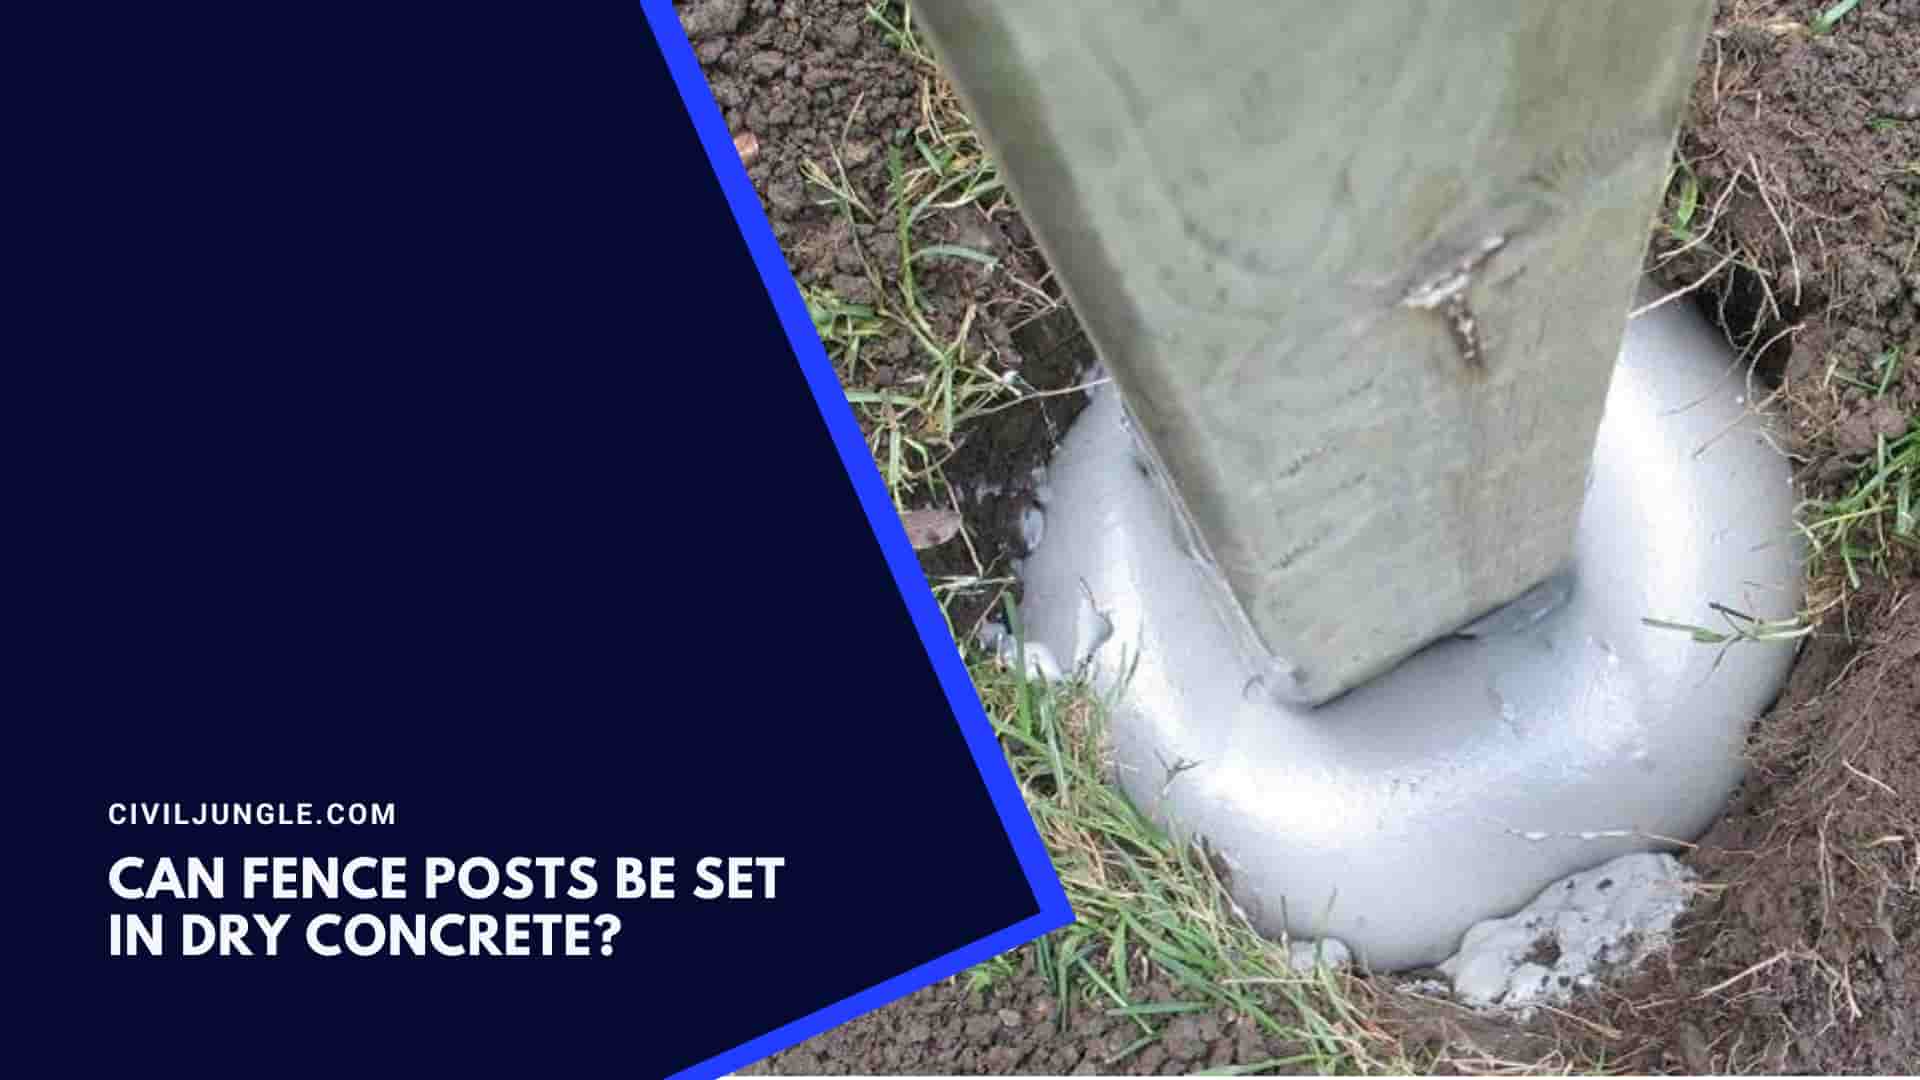 Can Fence Posts Be Set In Dry Concrete?